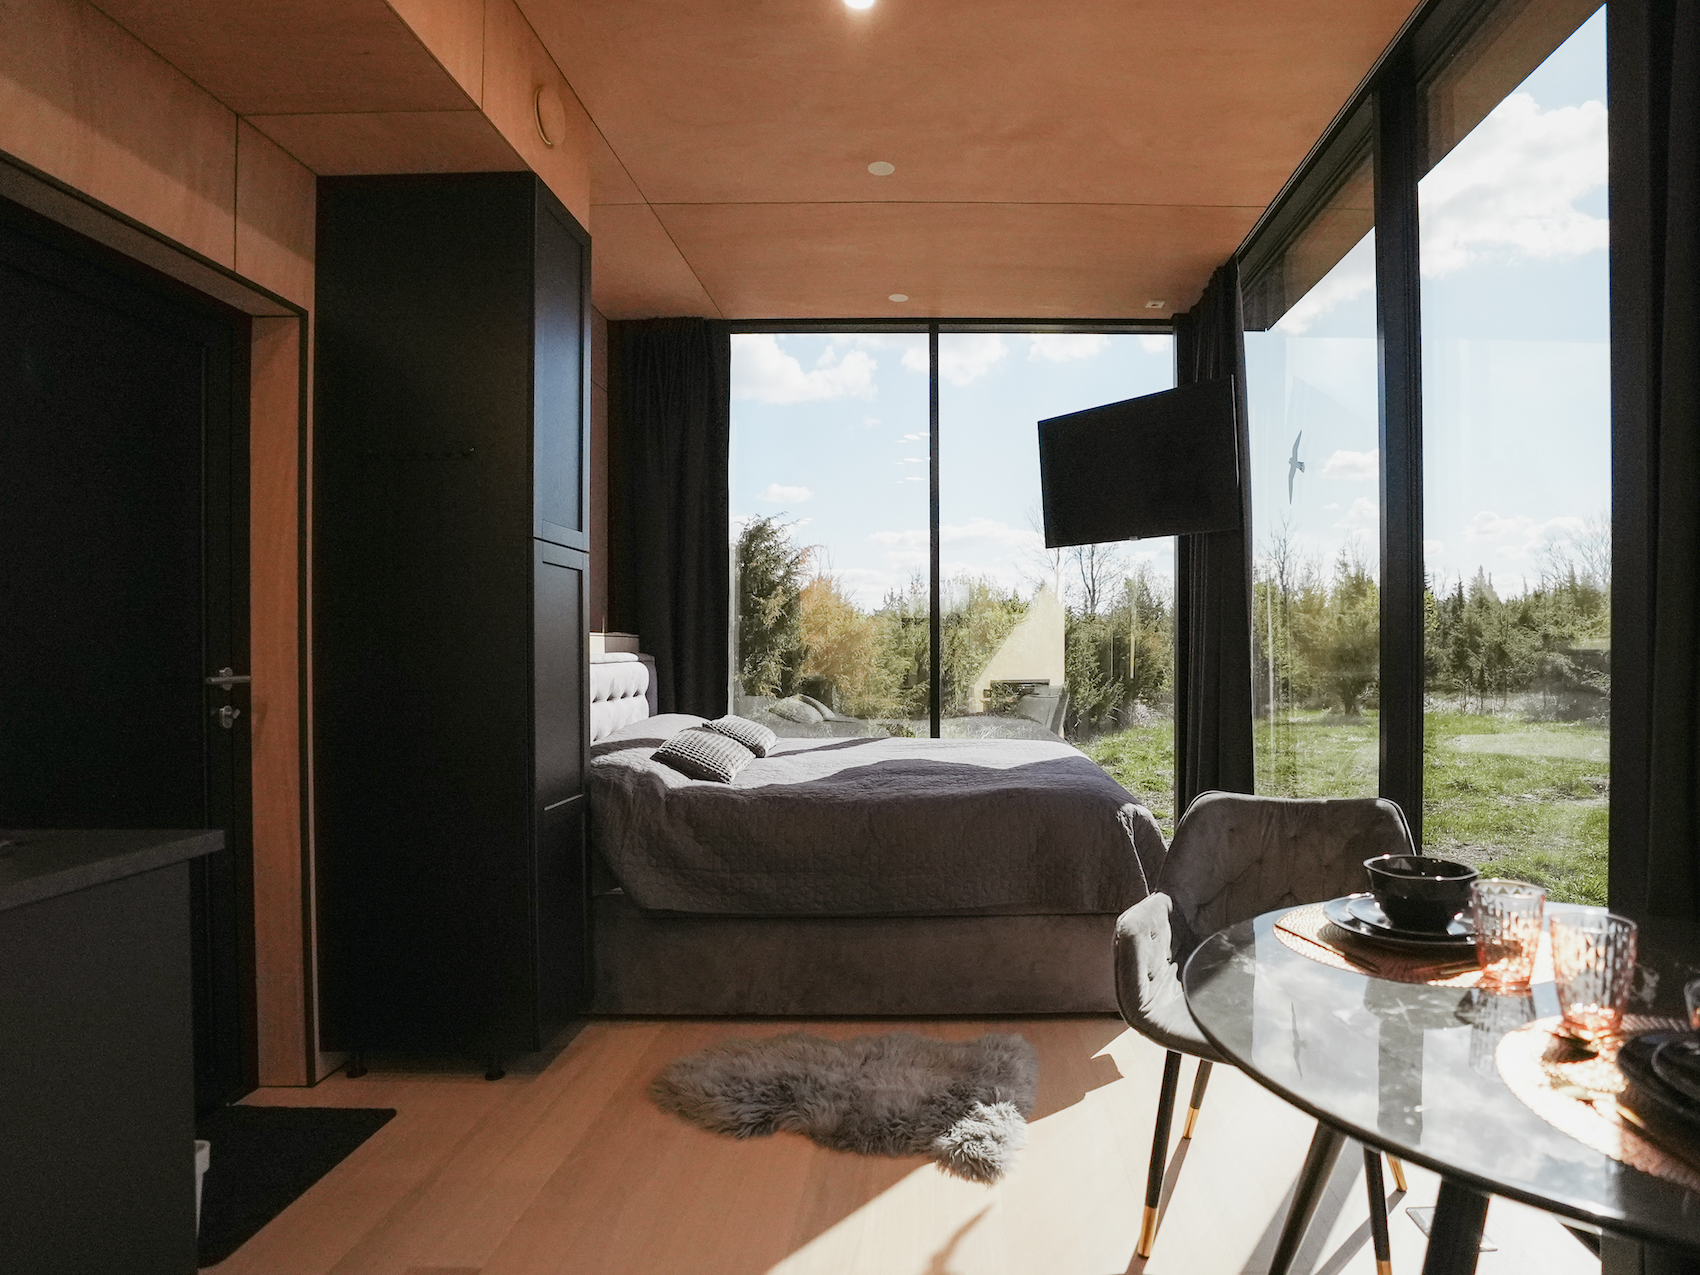 A holiday house with a sauna and a hot tub in the woods, Estonian cabin mirror house with jacuzzi - Juniper Minivillas, the best holiday homes in Estonia